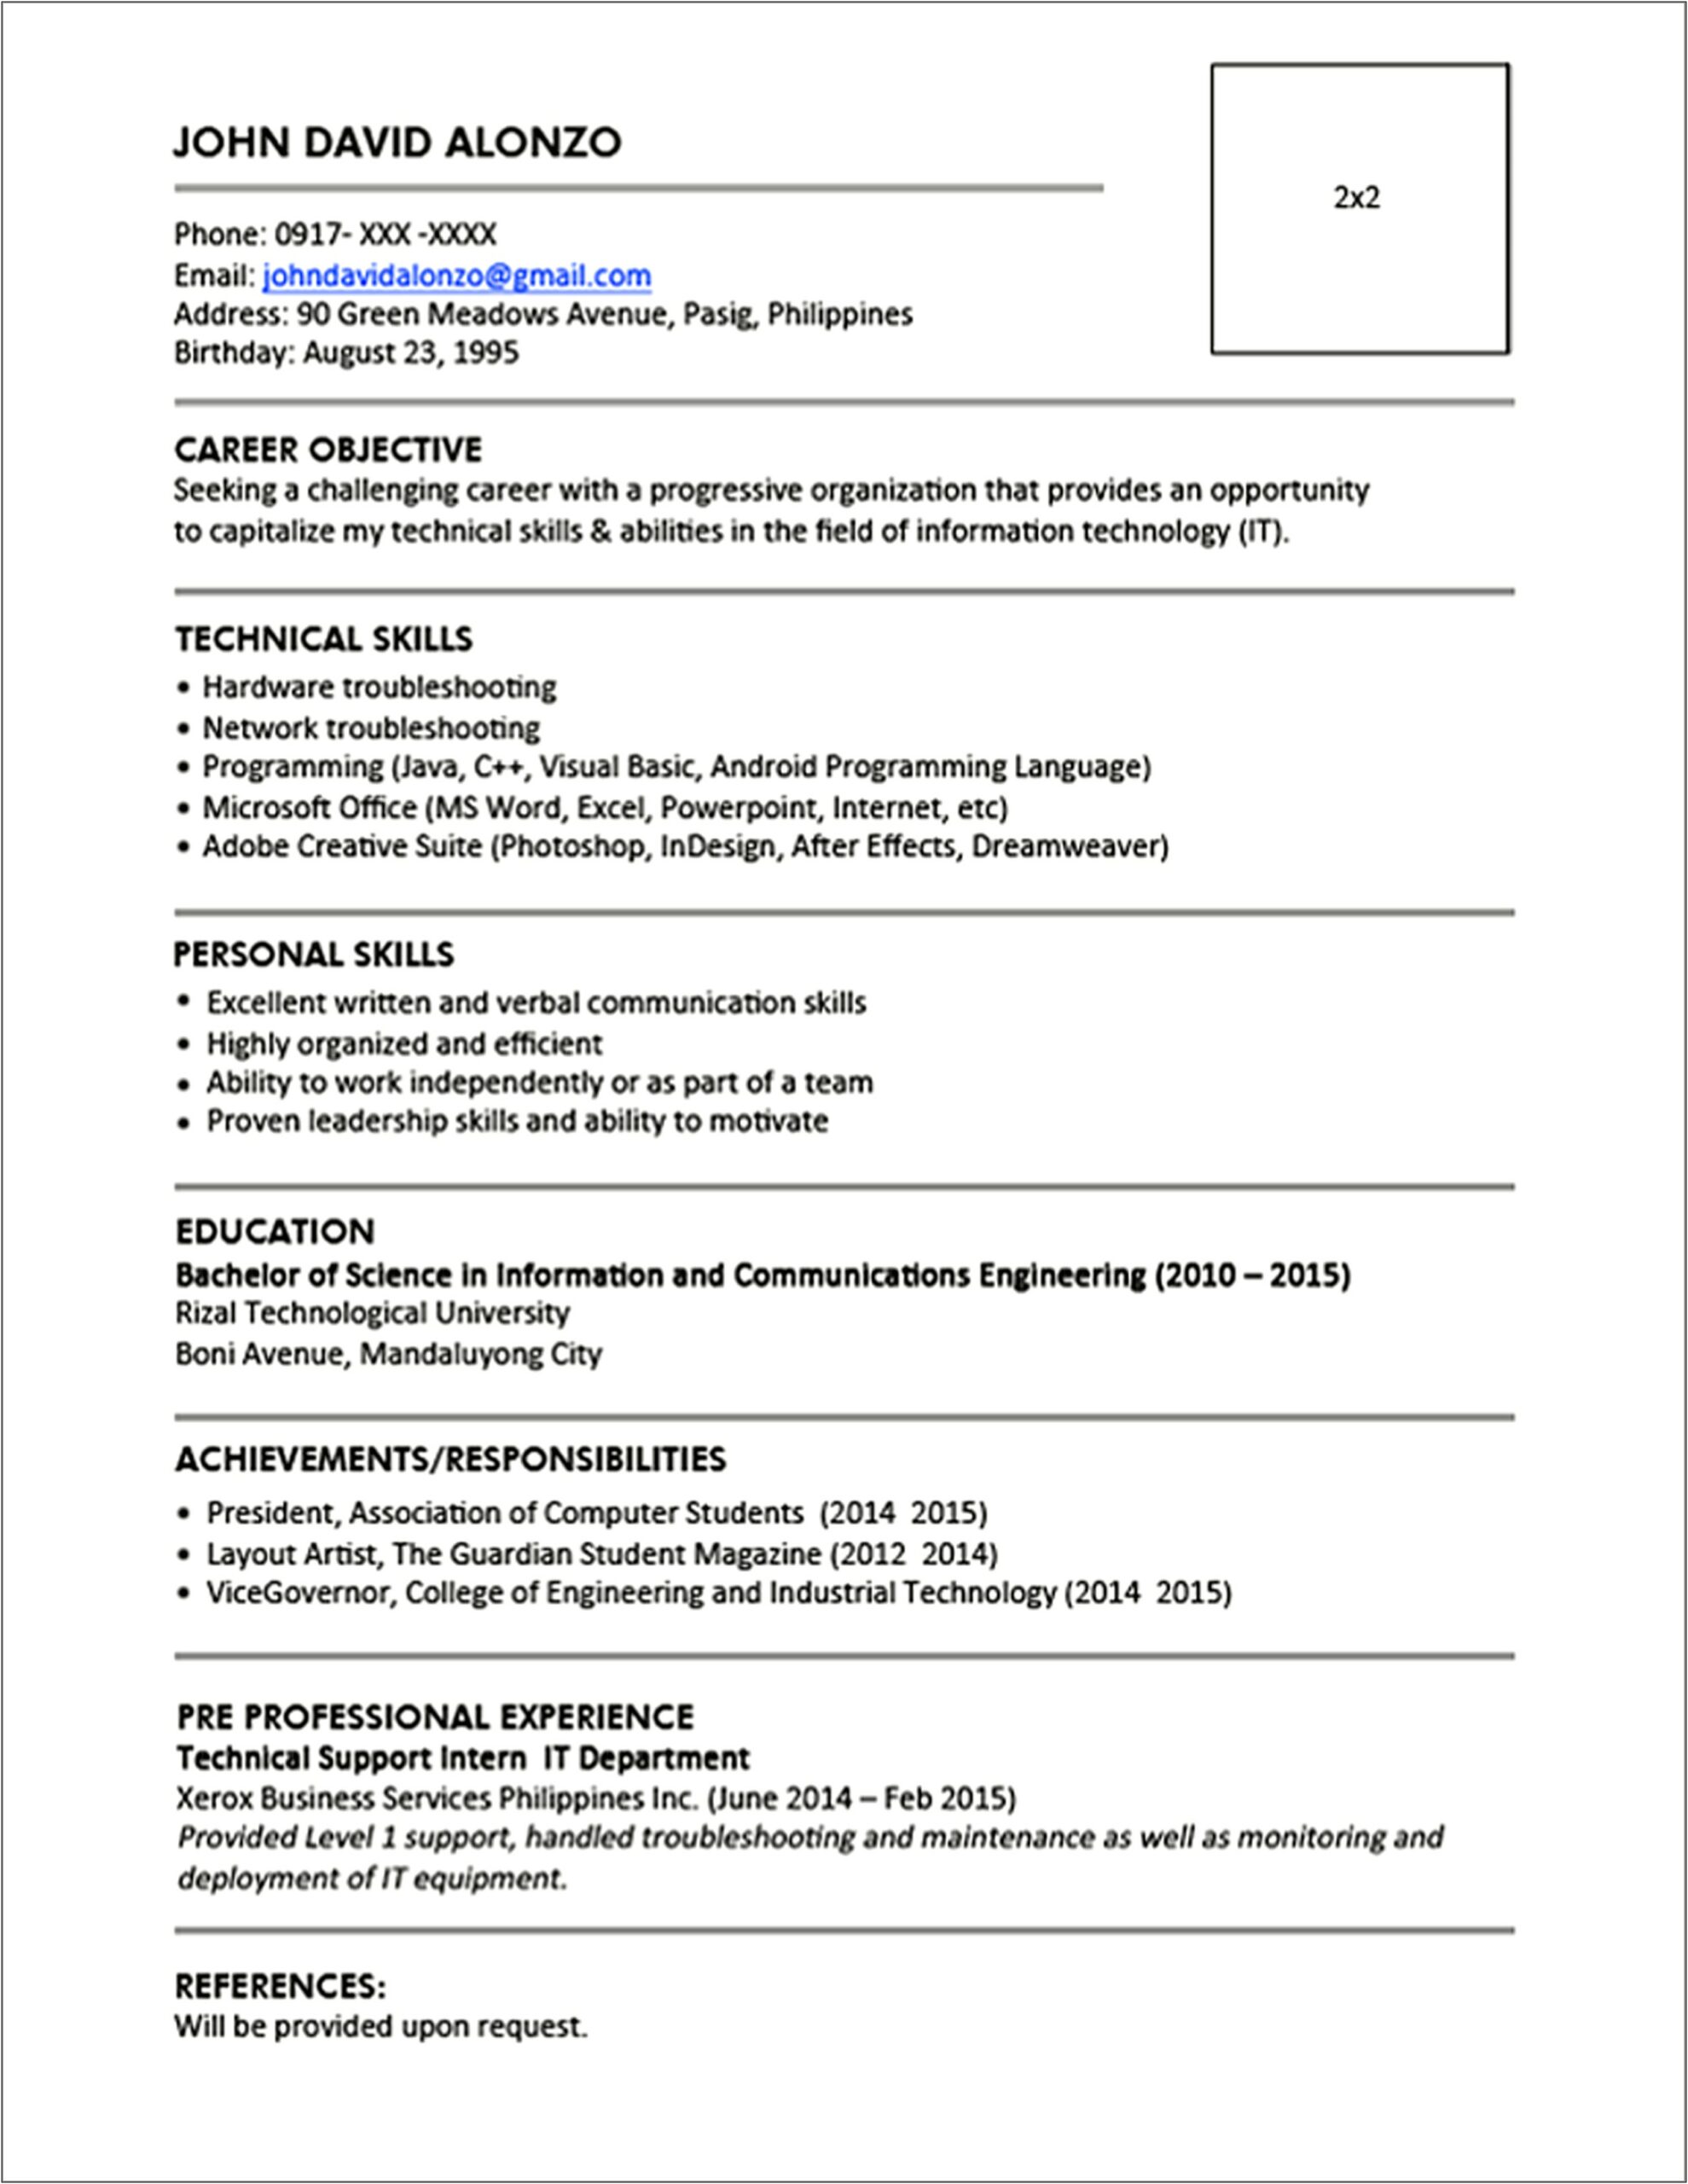 Resume Format Sample For Job Application Philippines